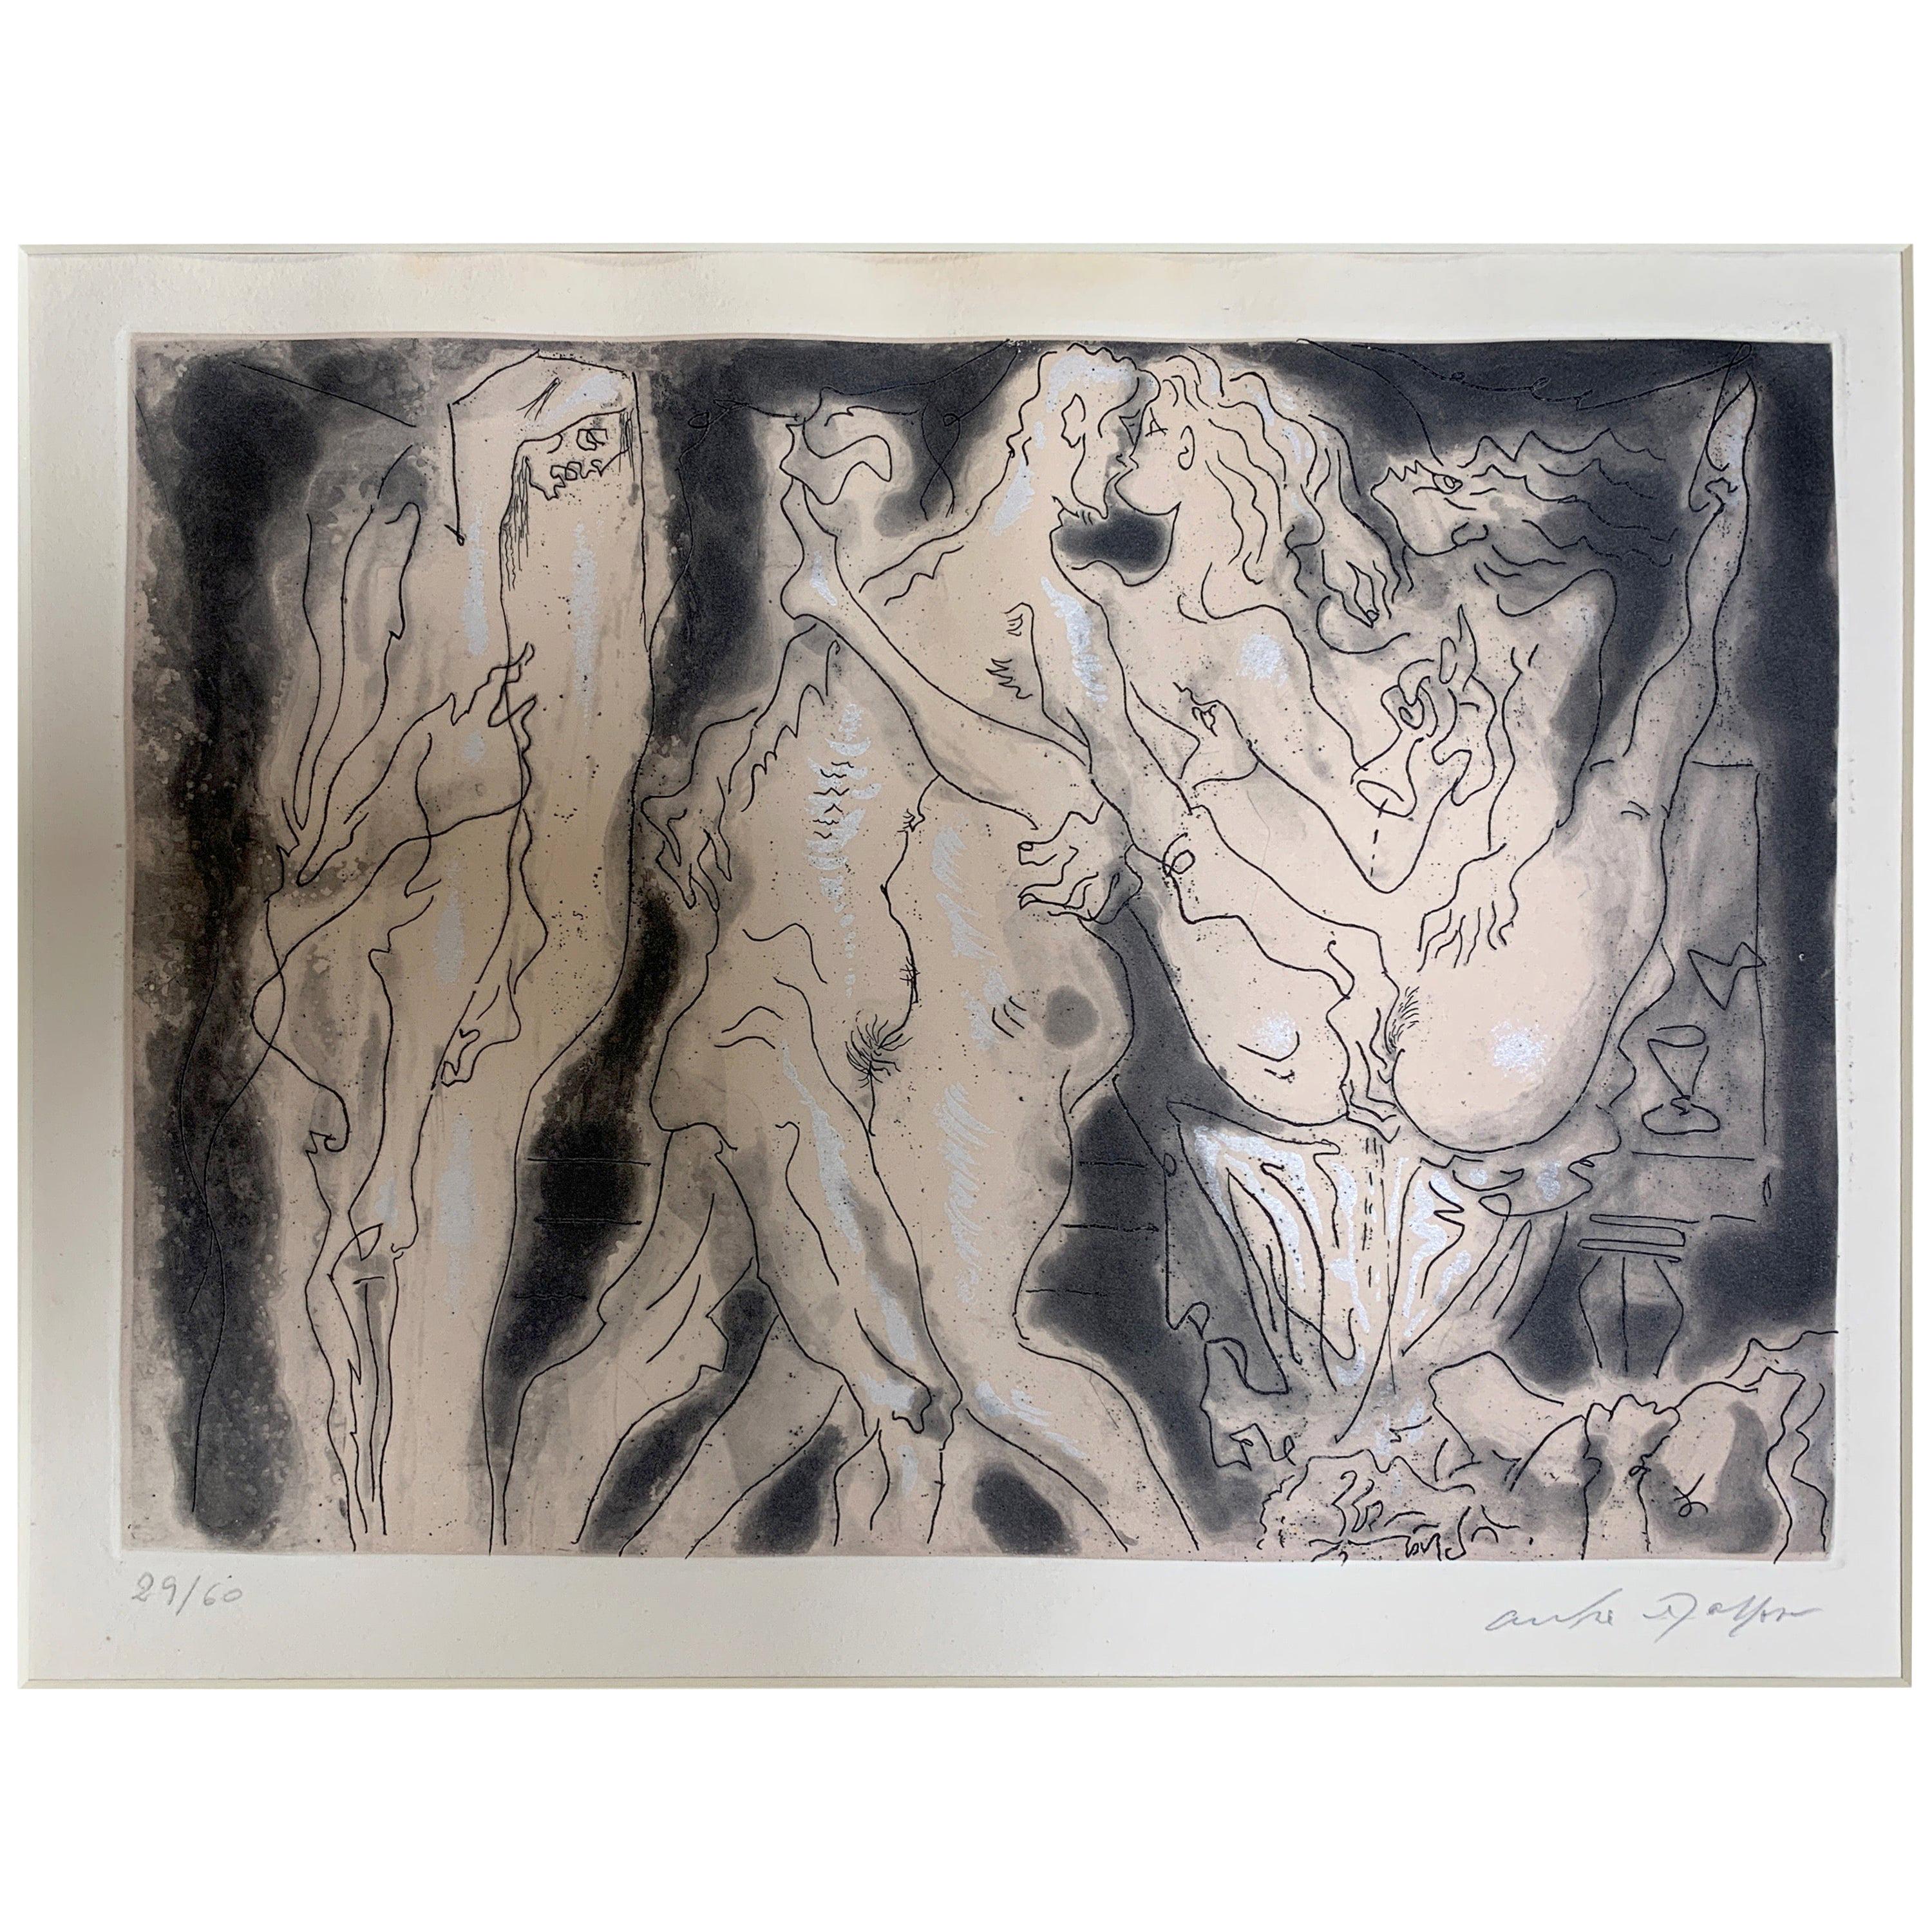 Series of Nine Surrealist Erotic Lithographs by Andre Masson, Signed / Numbered